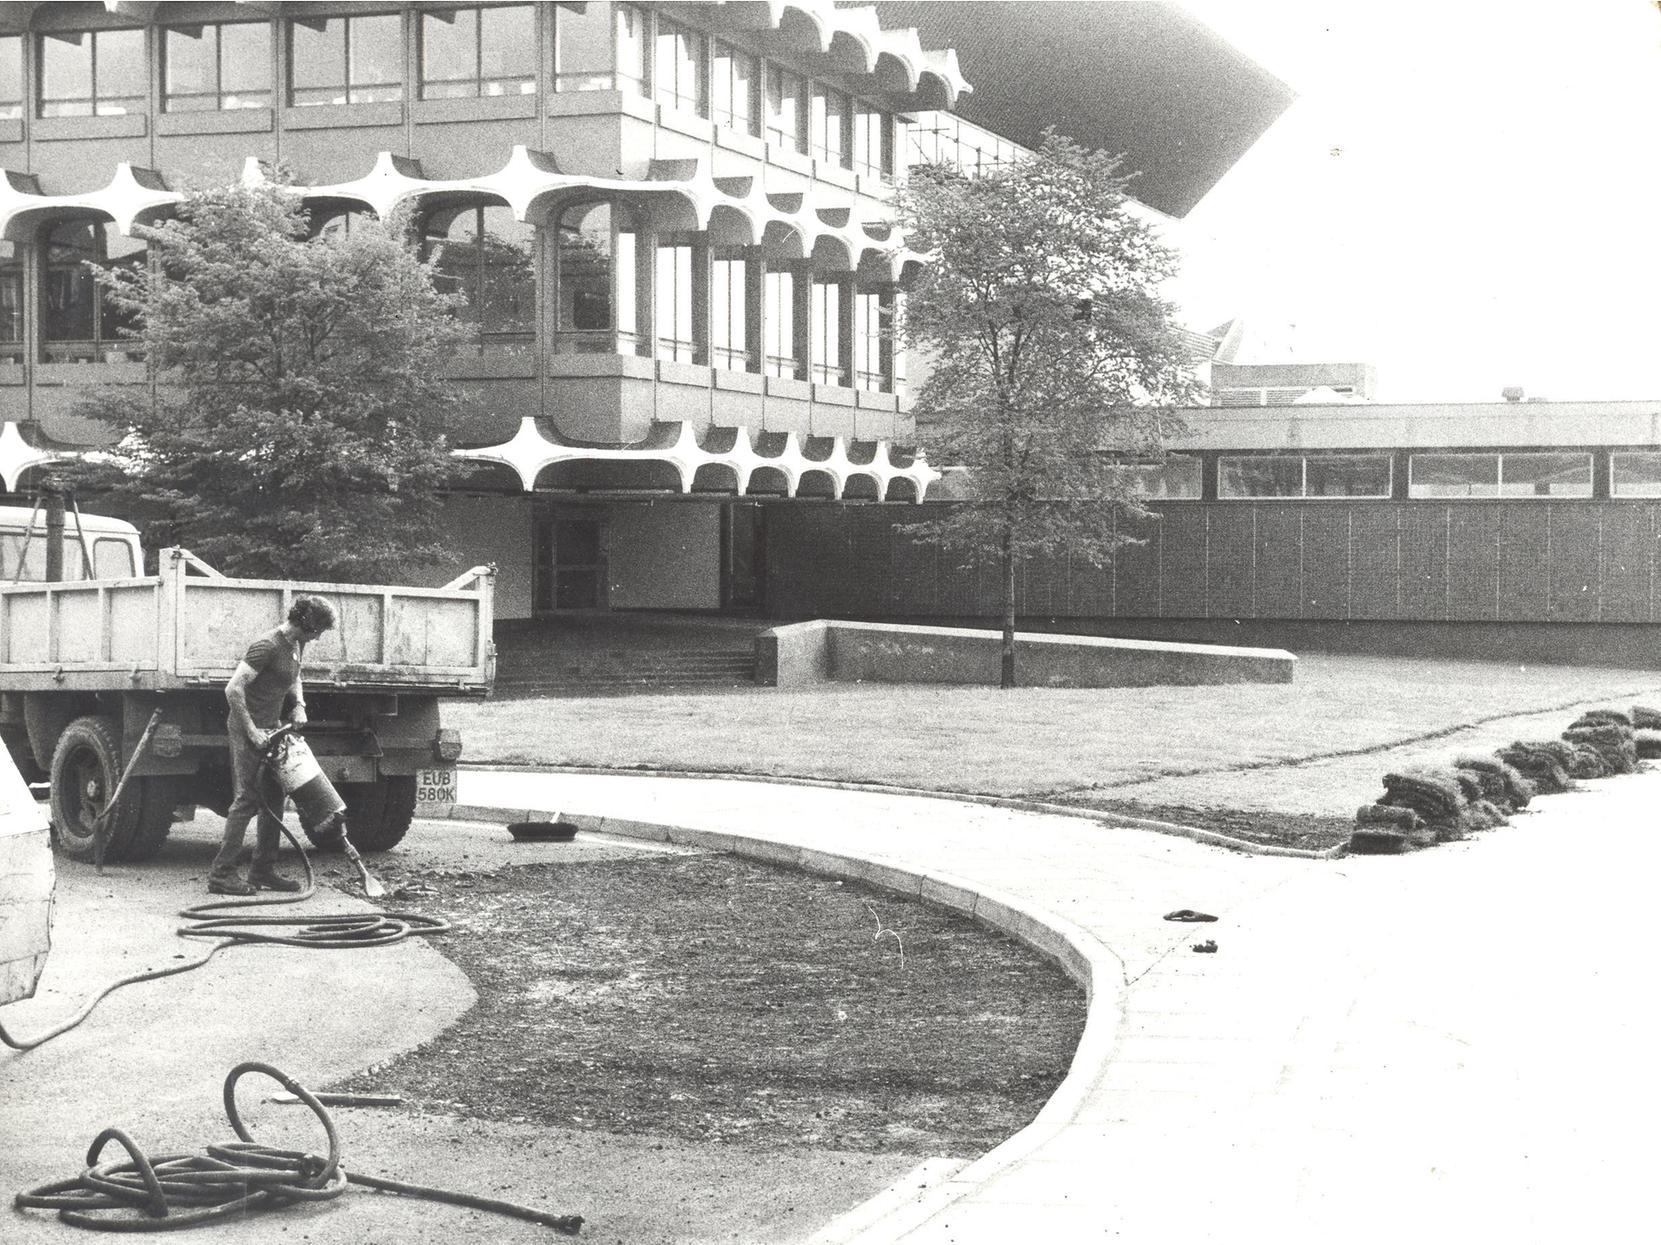 Just weeks after the concourse between Westgate Police Station and the International Pool was landscaped workmen had to dig it up. The Post Office needed access to manholes under the turf.